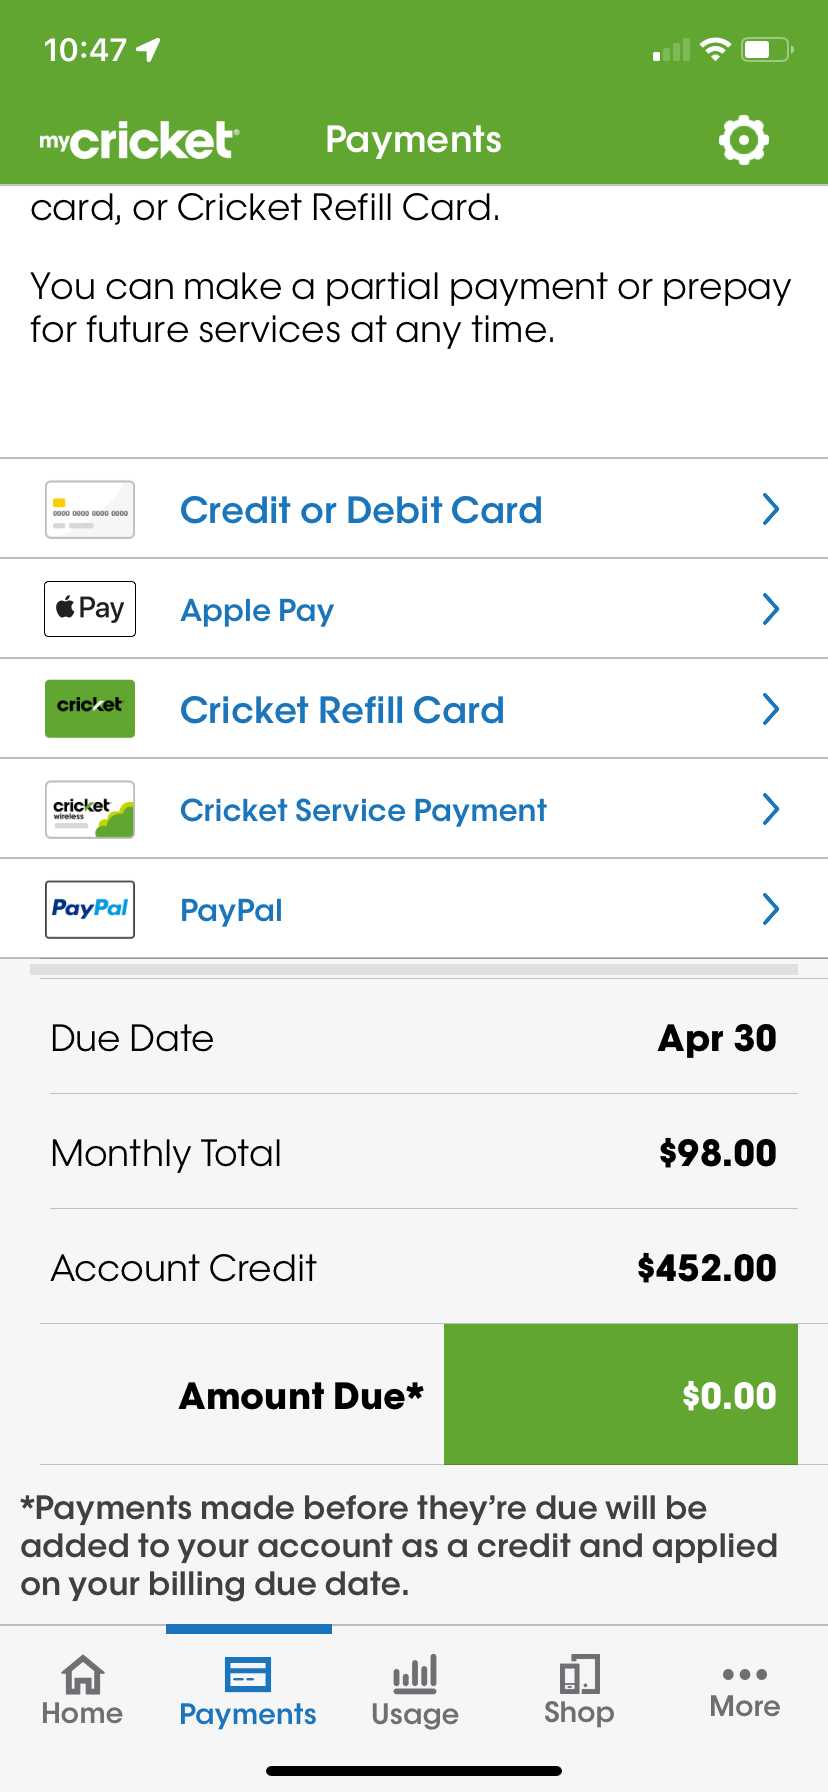 MyCricket payment page